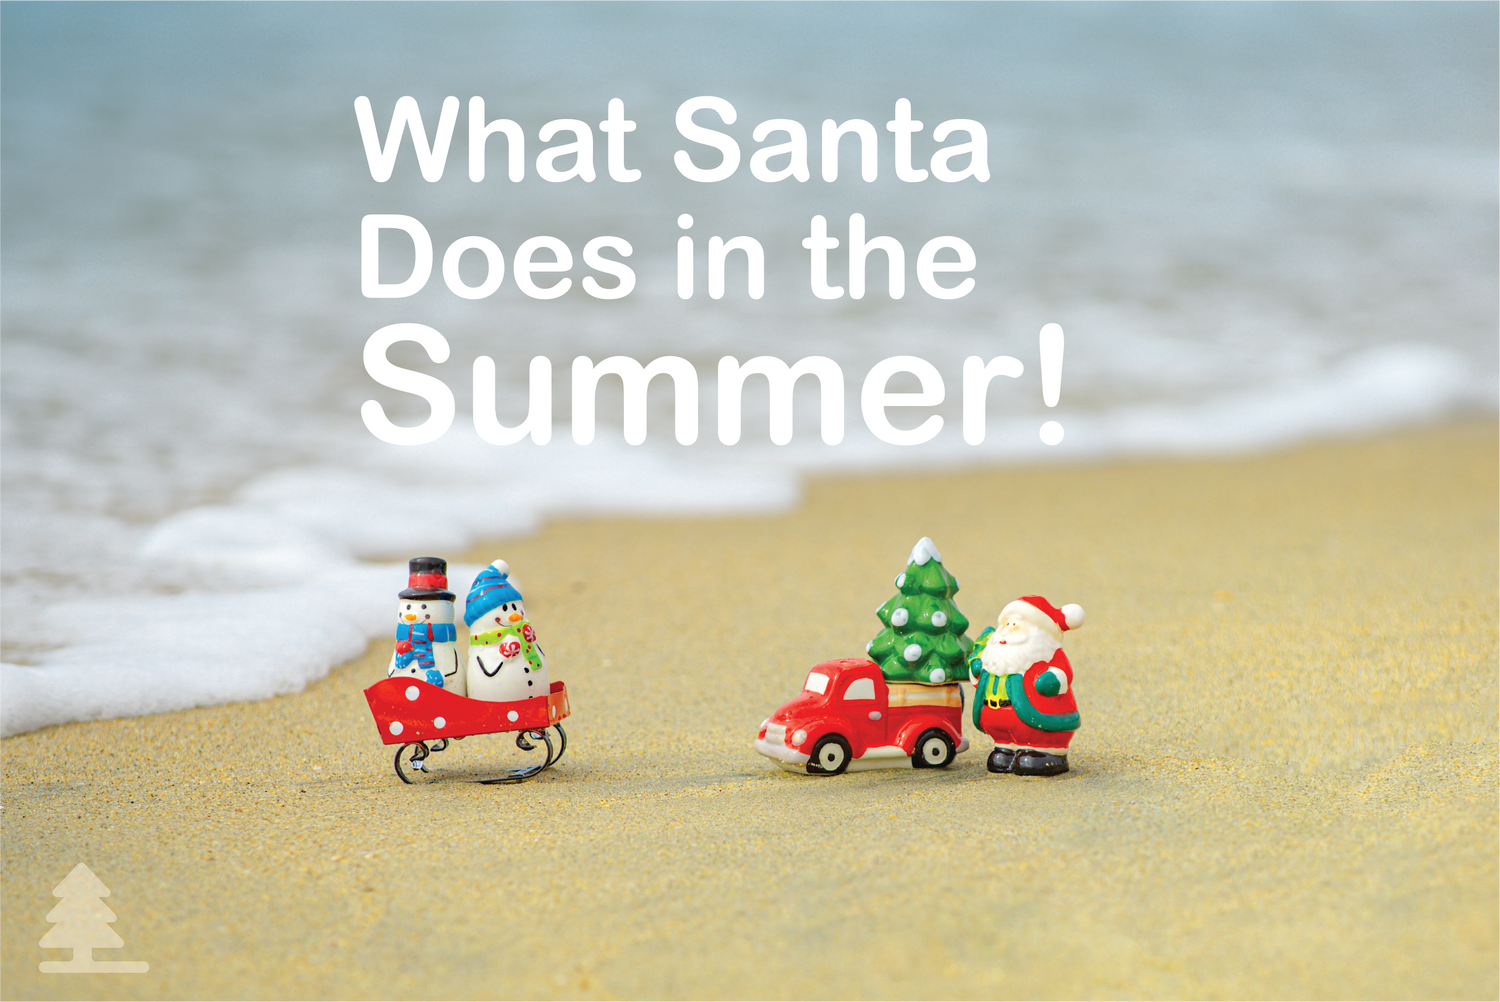 What Santa Does in the Summer